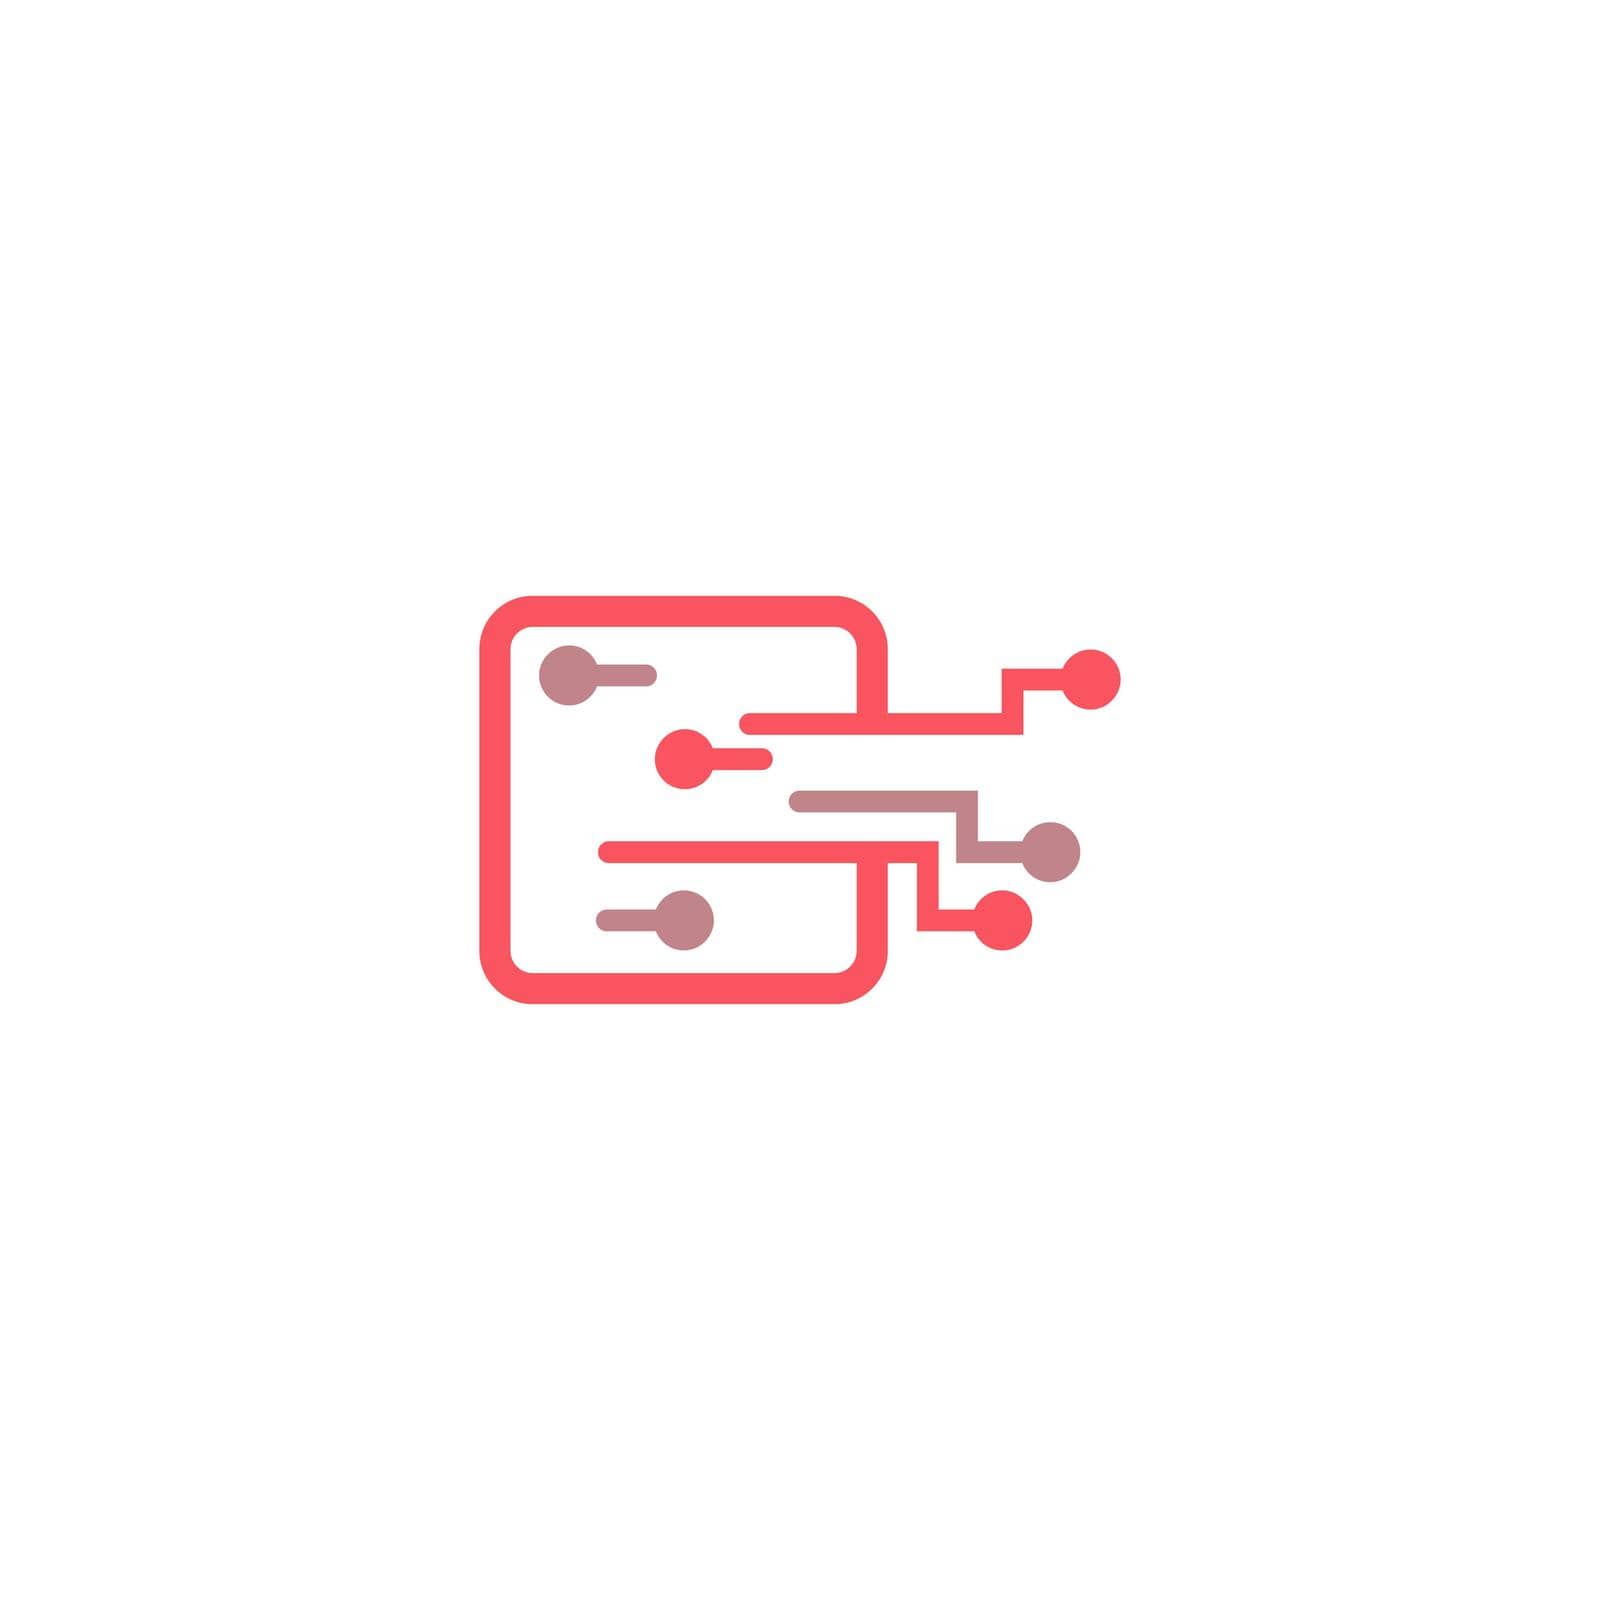 Circuit technology logo icon design vector by bellaxbudhong3